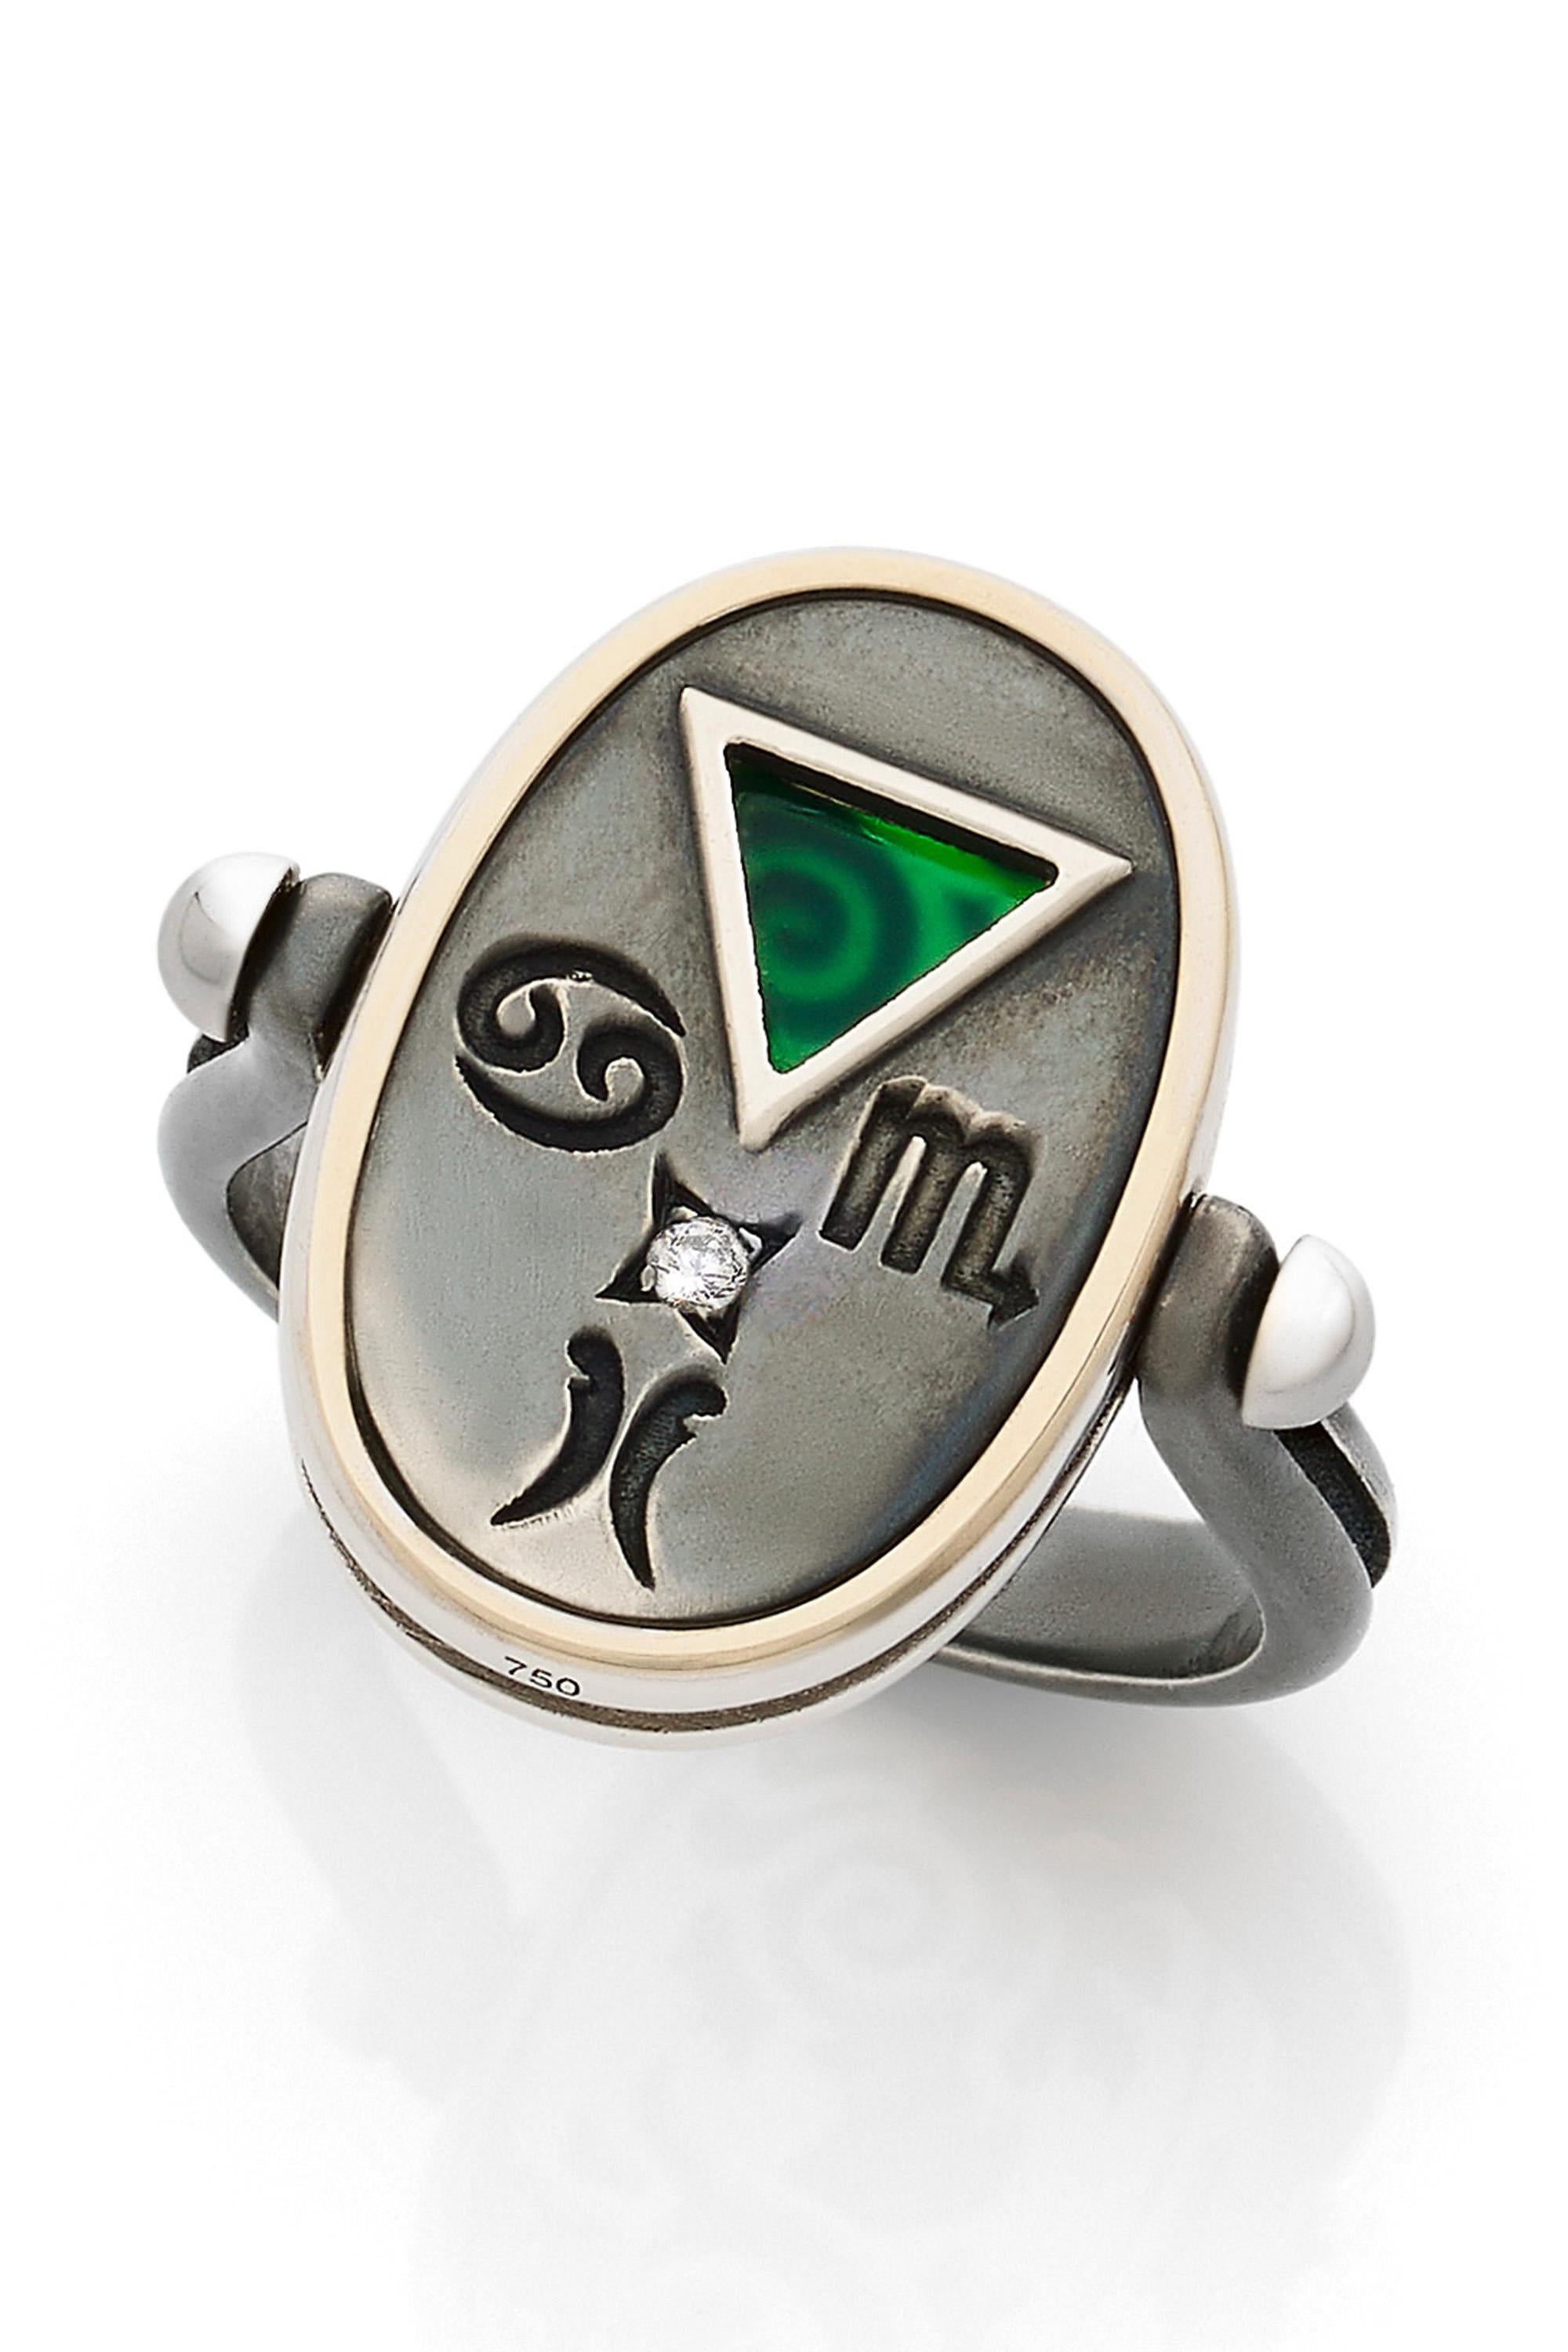 Gold and distressed silver ring. On one side, encrusted with a diamond, are engraved Water signs (Cancer, Scorpio, Pisces). On the other side is an openwork depicting a fish on an agate base.

Details:
Green Agate
Diamond: 0.015 cts
18k White Gold: